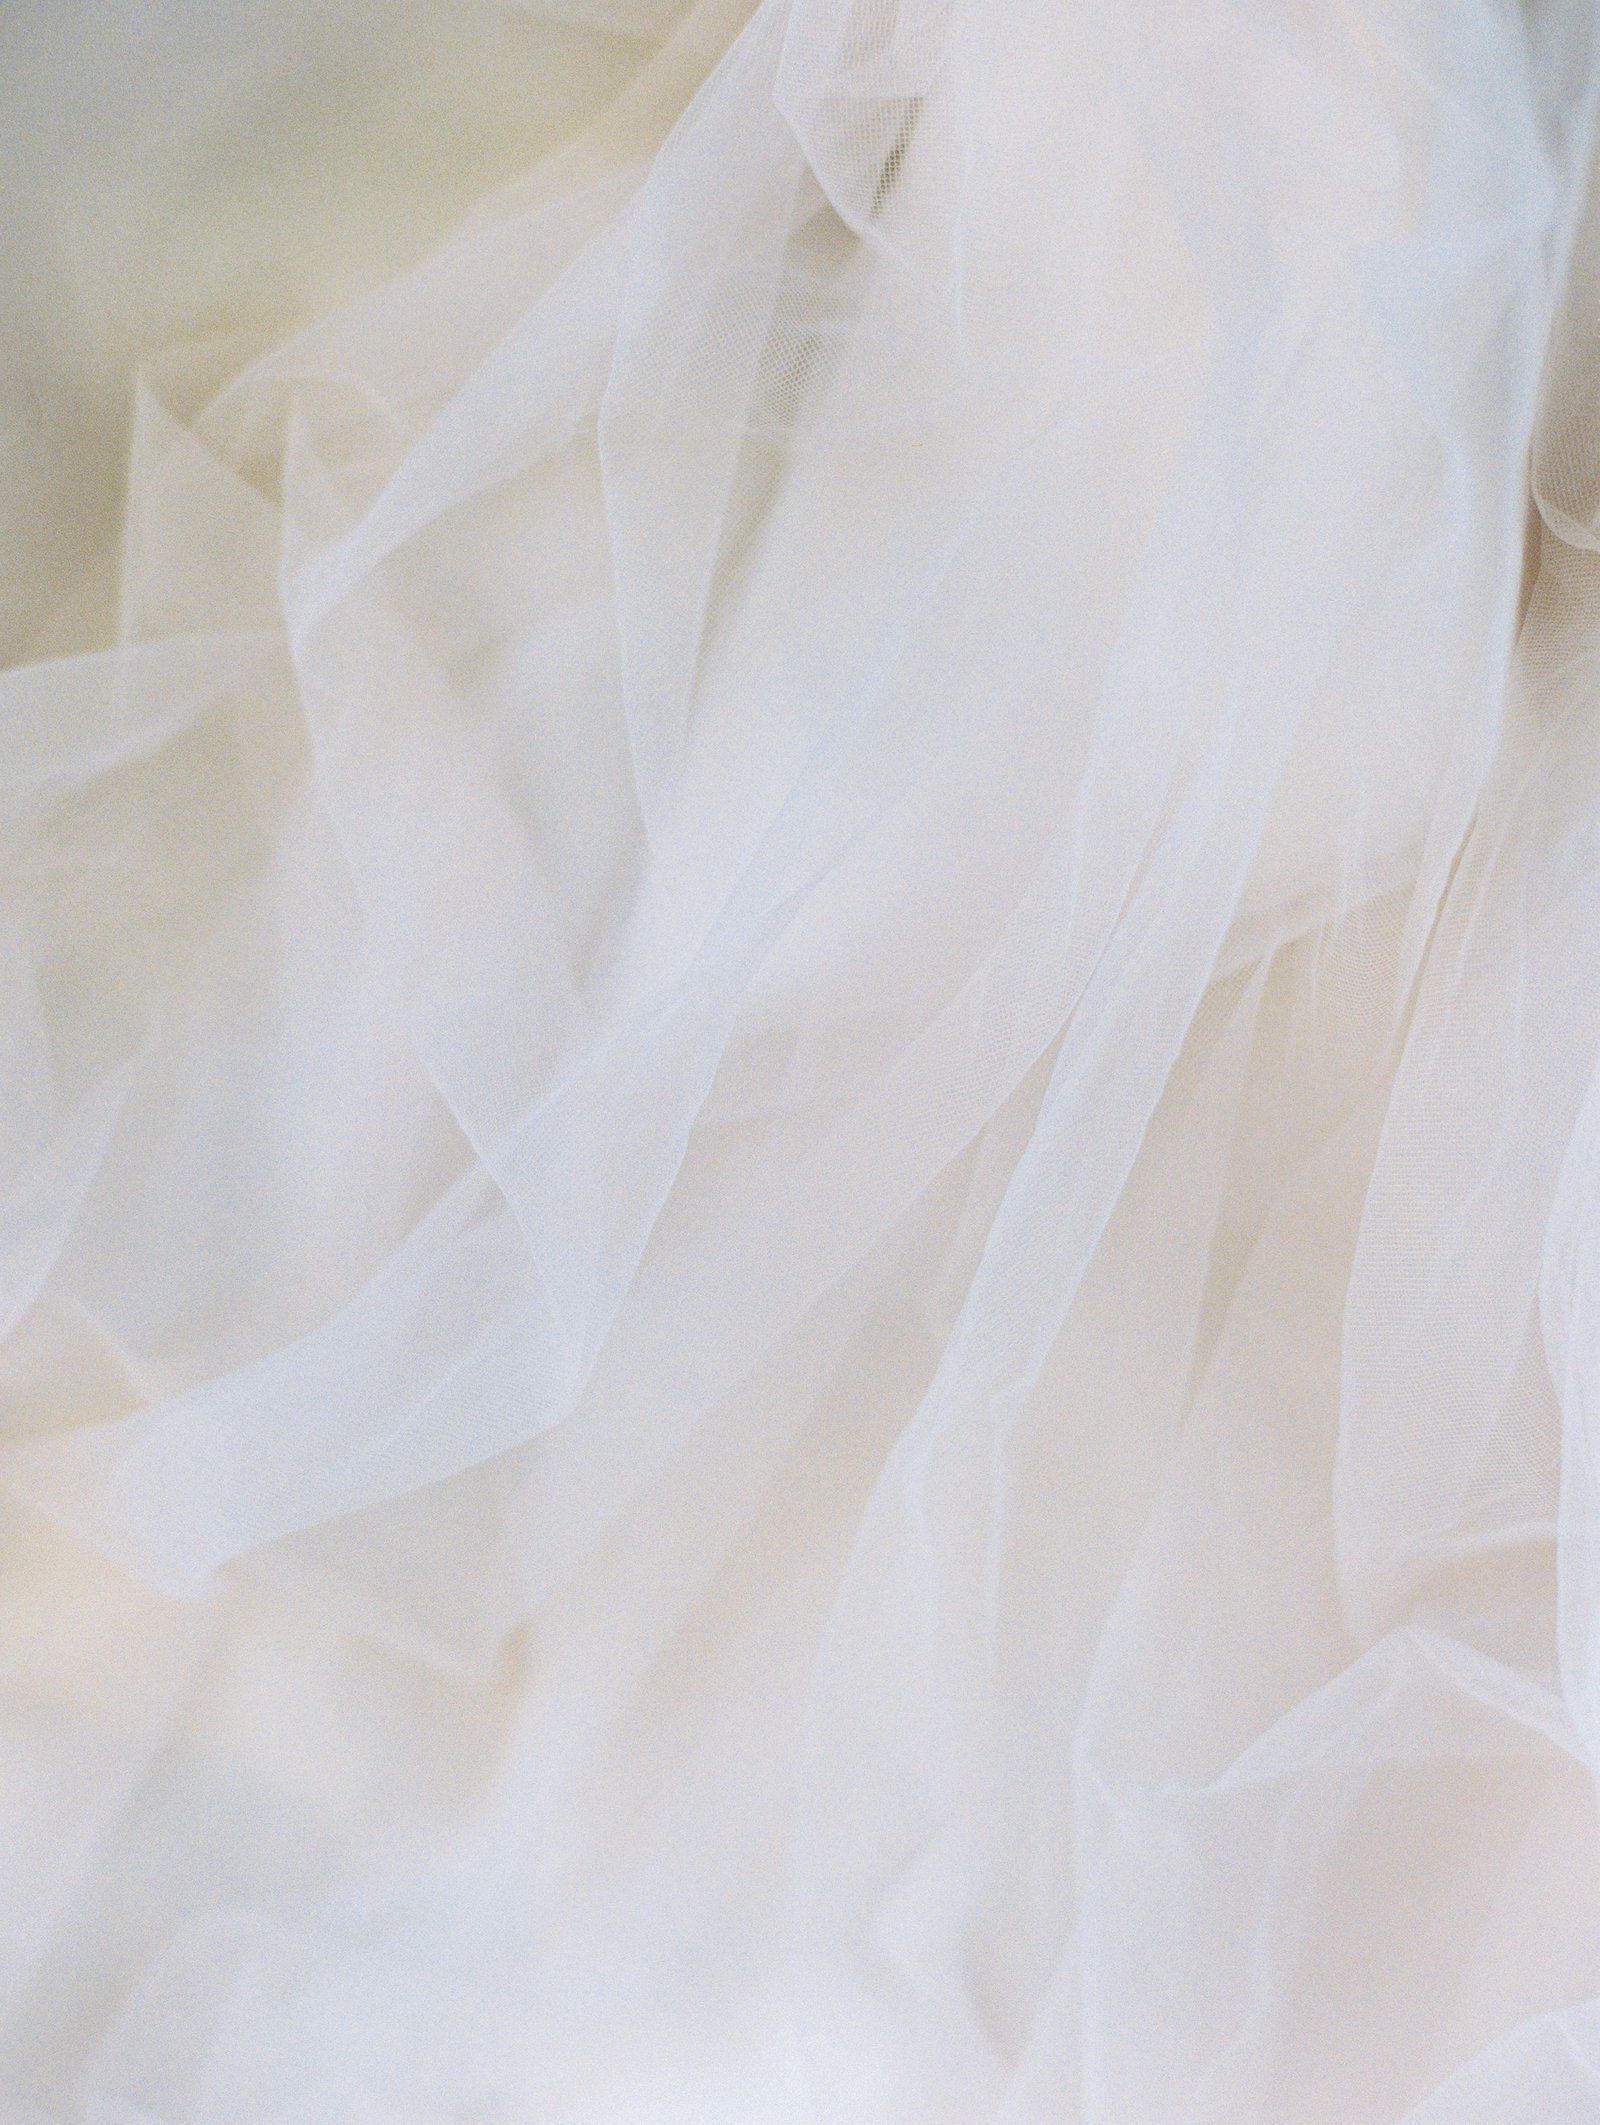 Ivory tulle